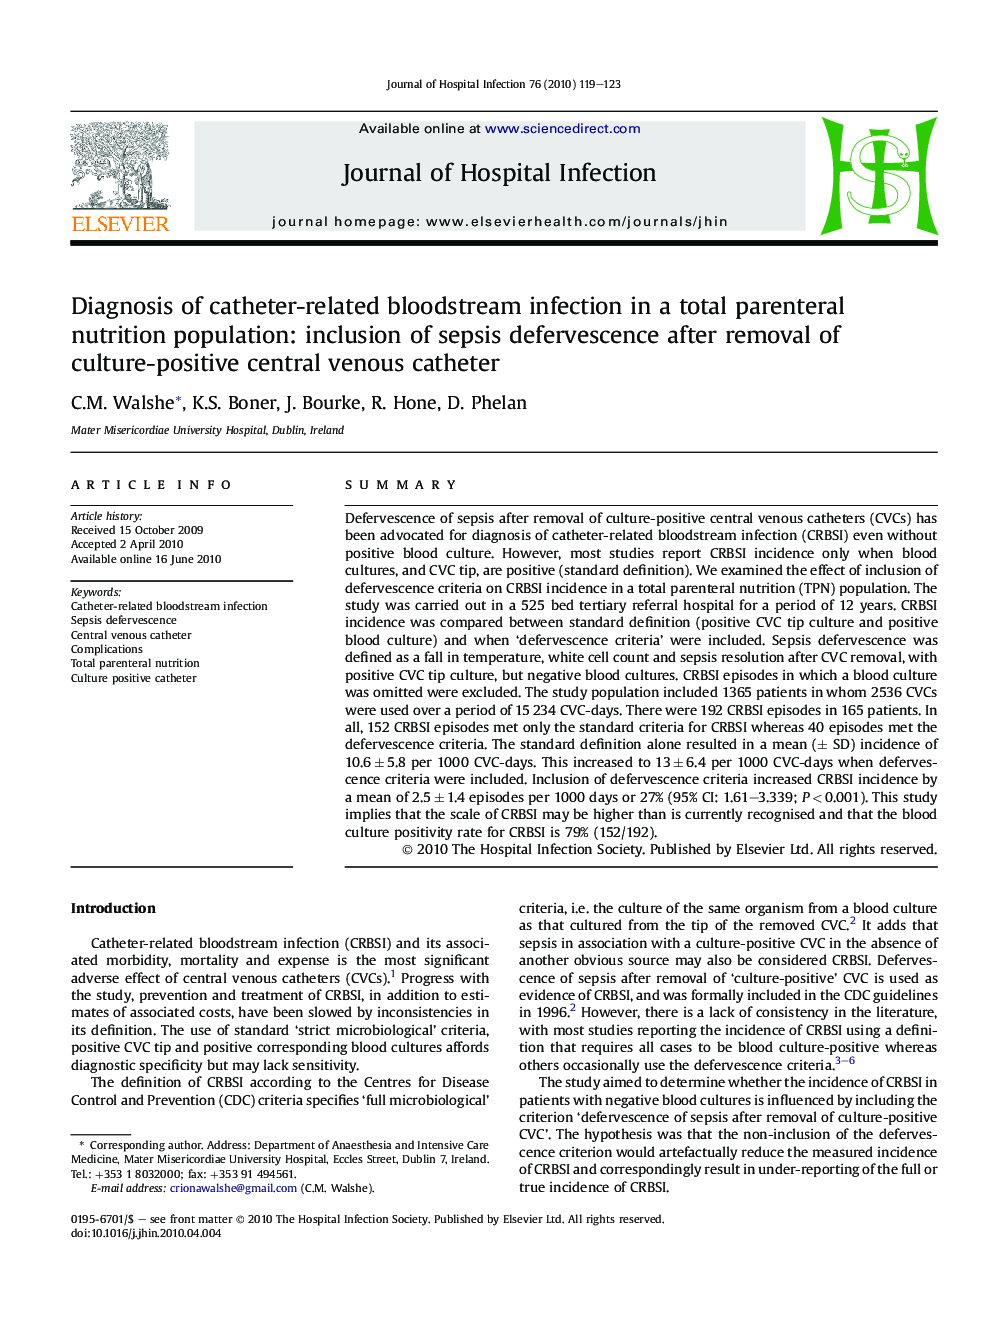 Diagnosis of catheter-related bloodstream infection in a total parenteral nutrition population: inclusion of sepsis defervescence after removal of culture-positive central venous catheter